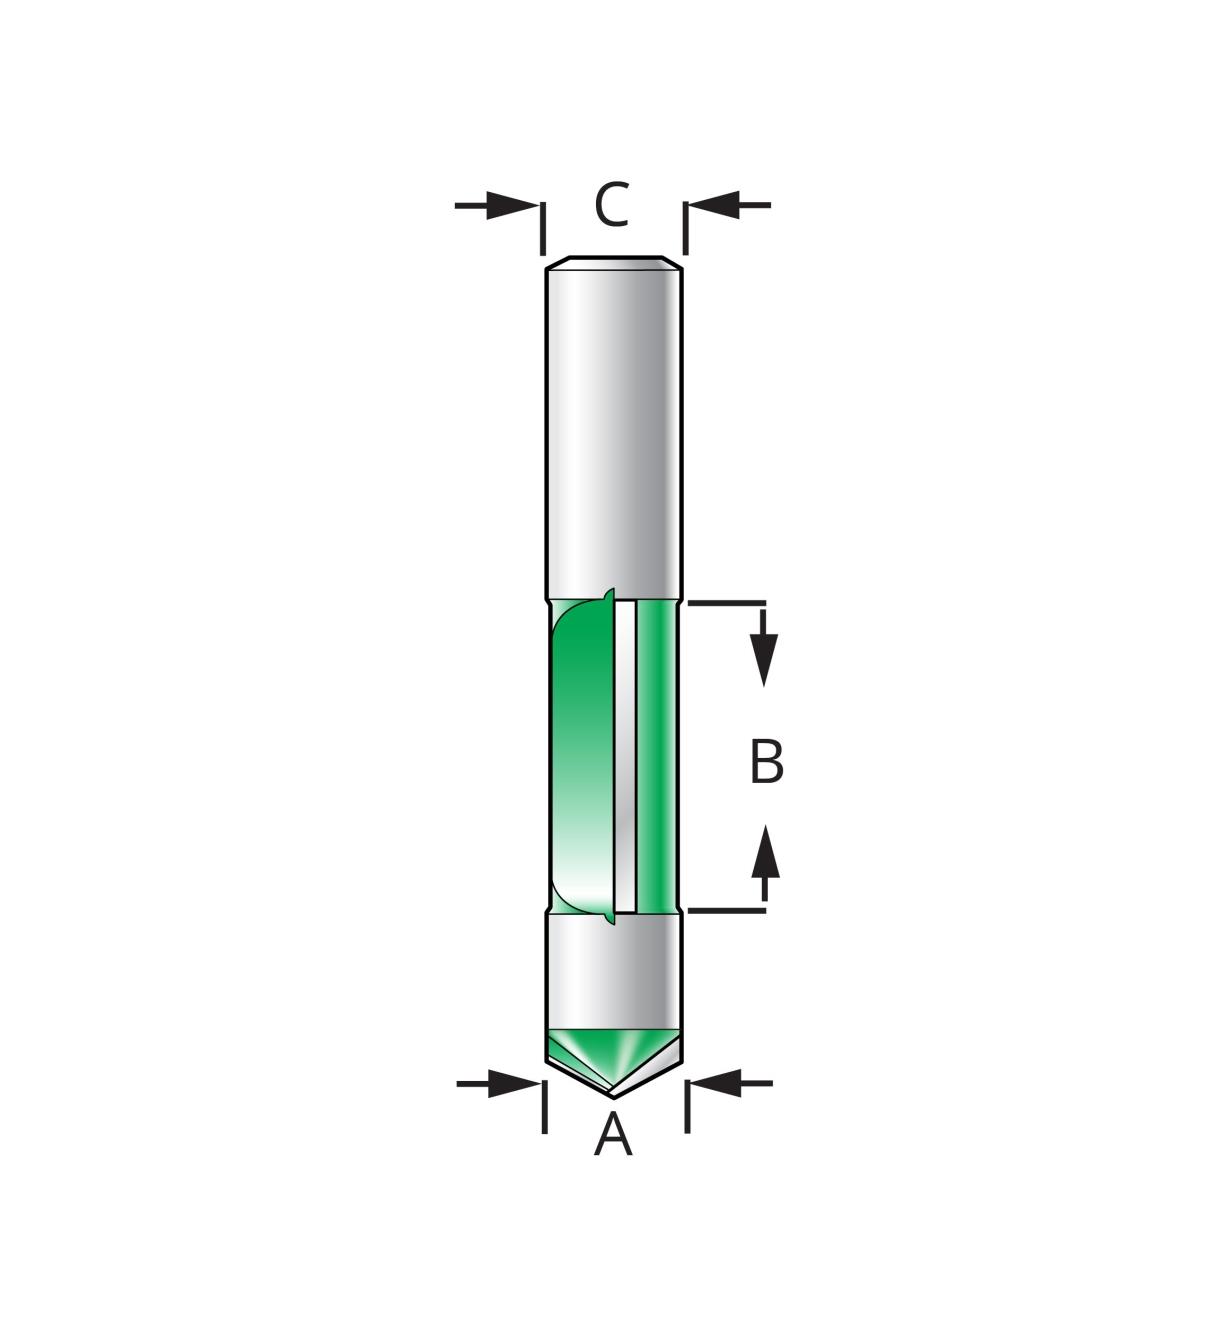 Diagram of bit labelled with letters representing measurements